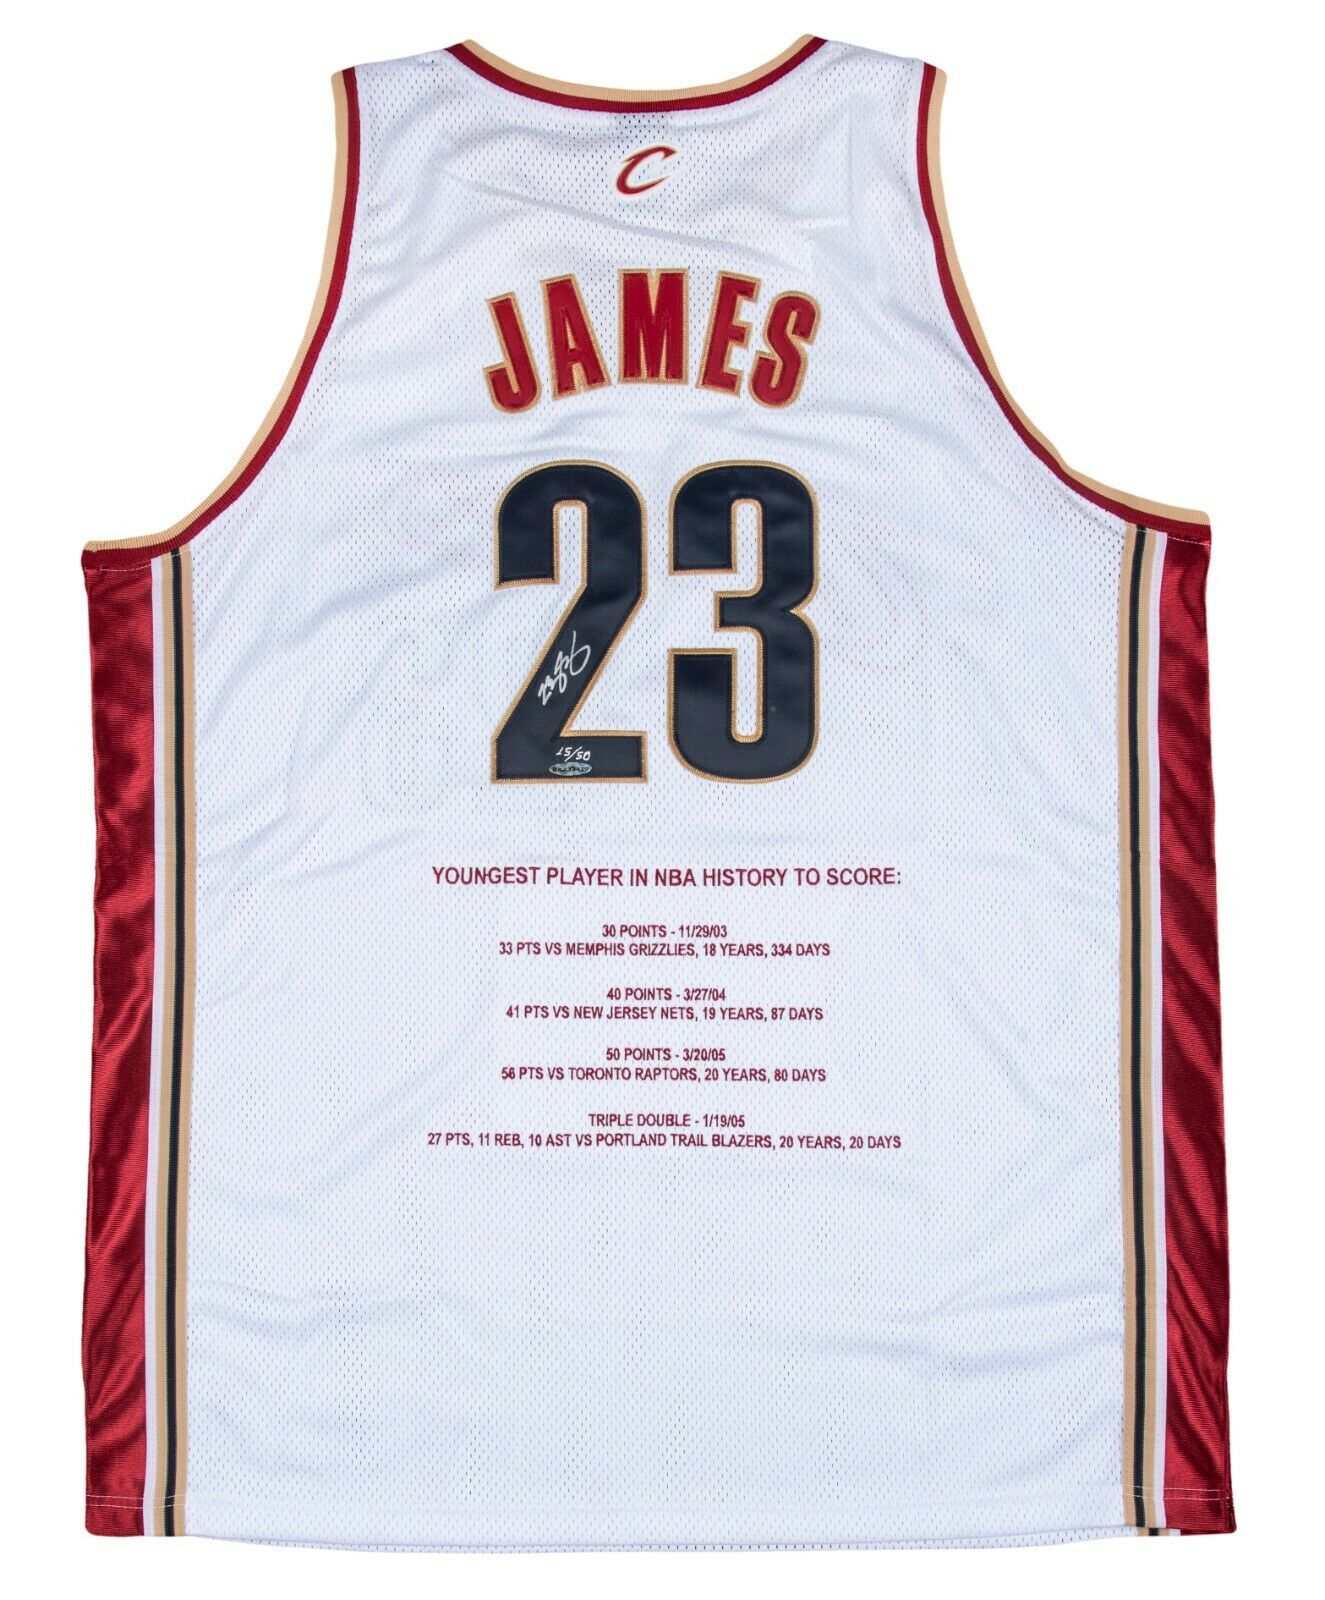 Bleachers Sports Music & Framing — LeBron James Autographed Authentic  Cleveland Cavaliers Jersey - Upper Deck Authenticated UDA COA